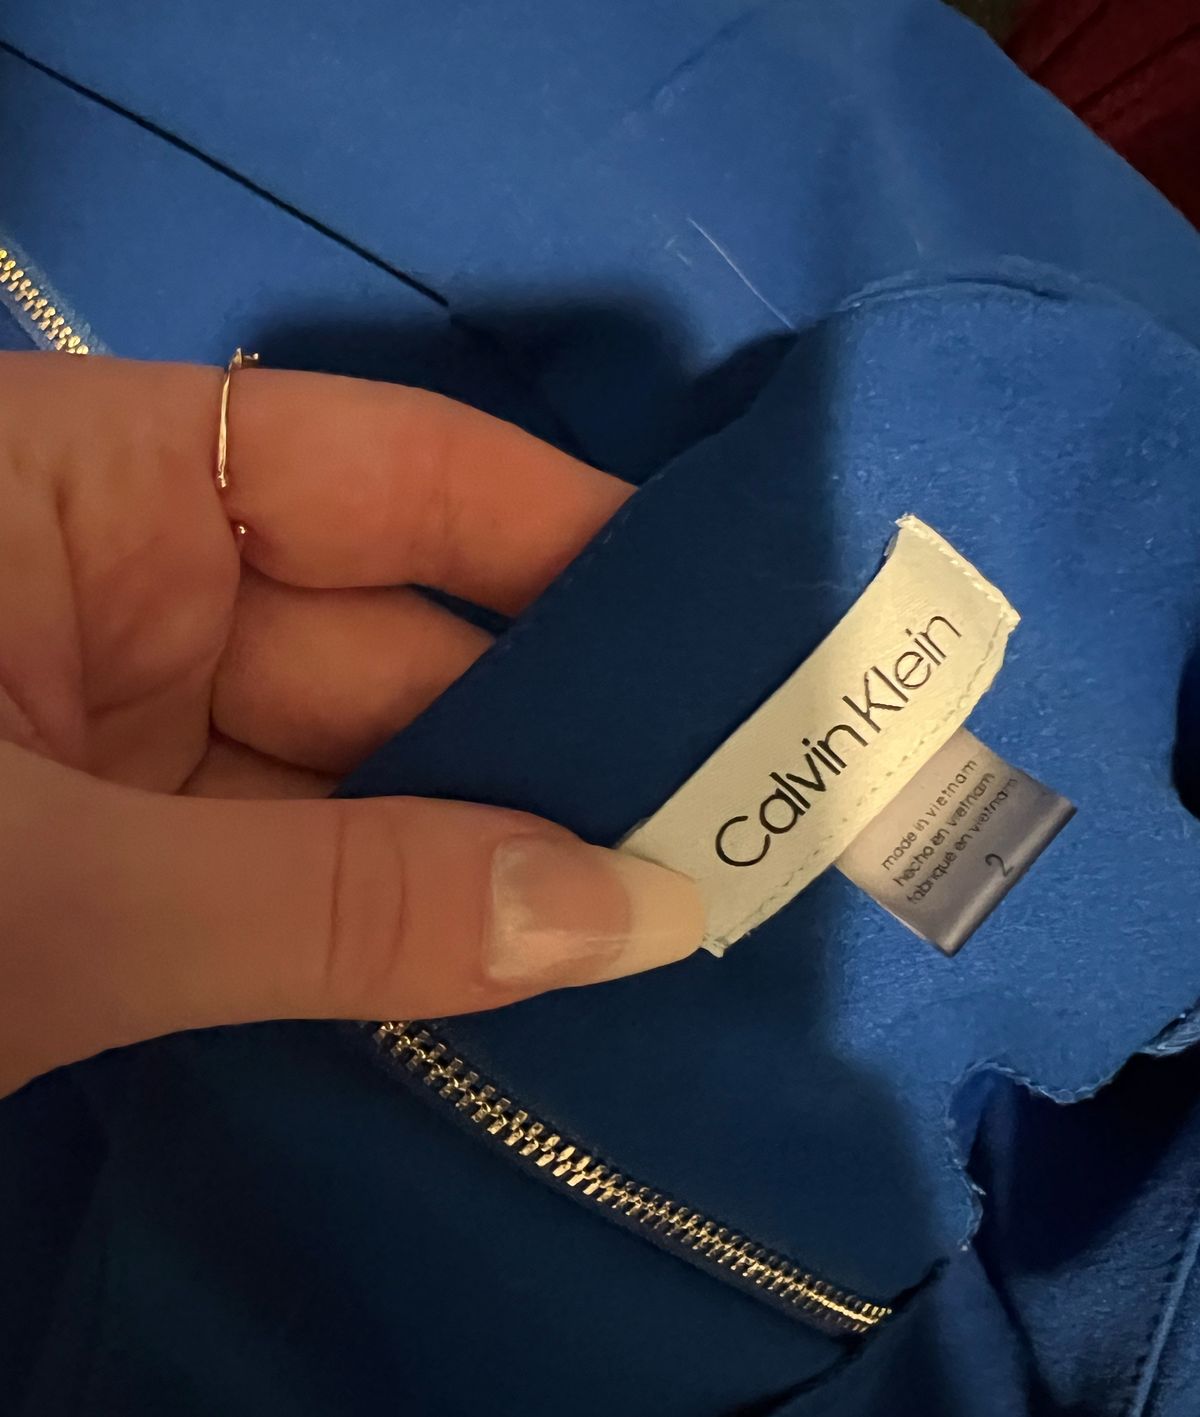 Calvin Klein Size 2 Pageant Blue Cocktail Dress on Queenly